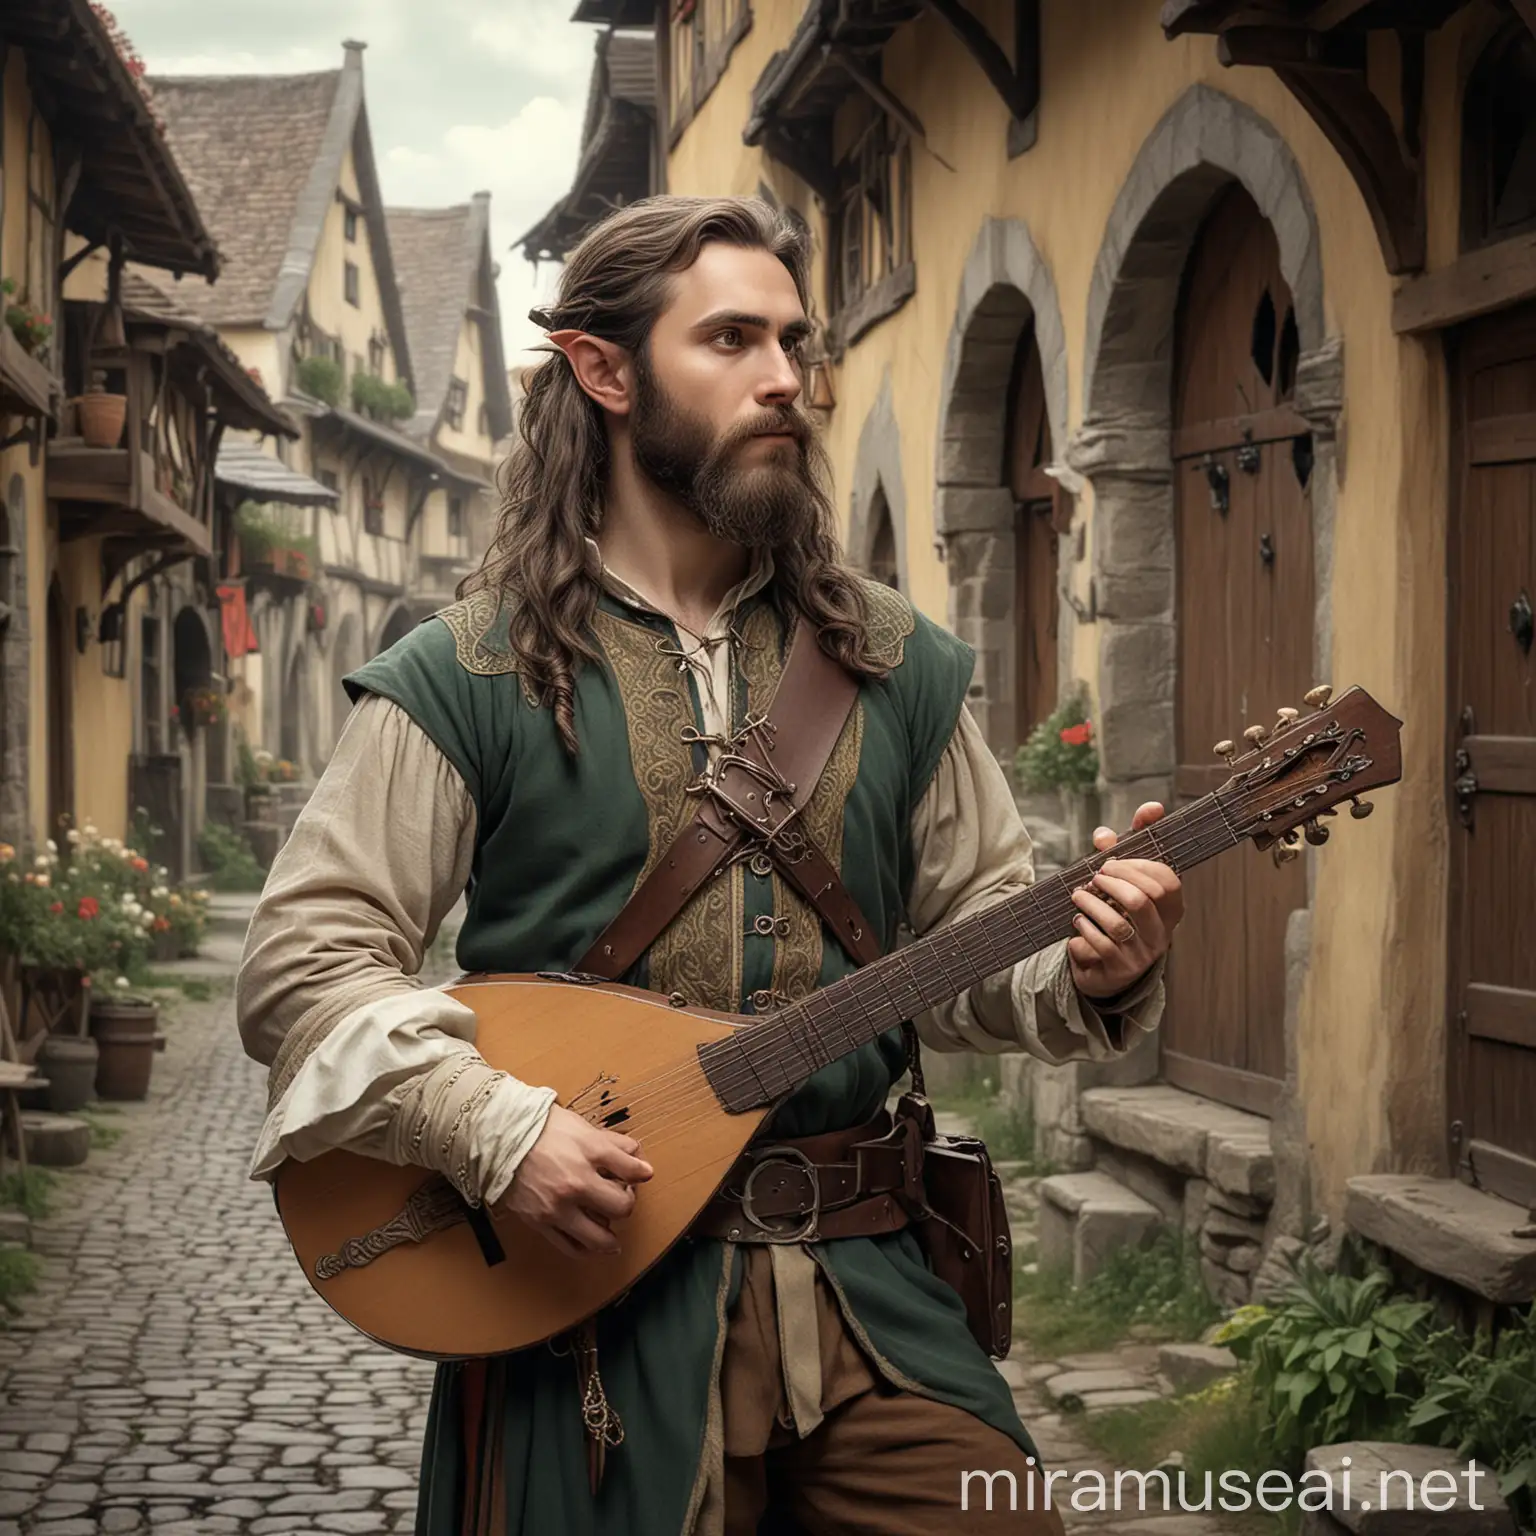 fantasy, bearded half elf bard with lute in medieval village, with poniard dagger on waistbelt

